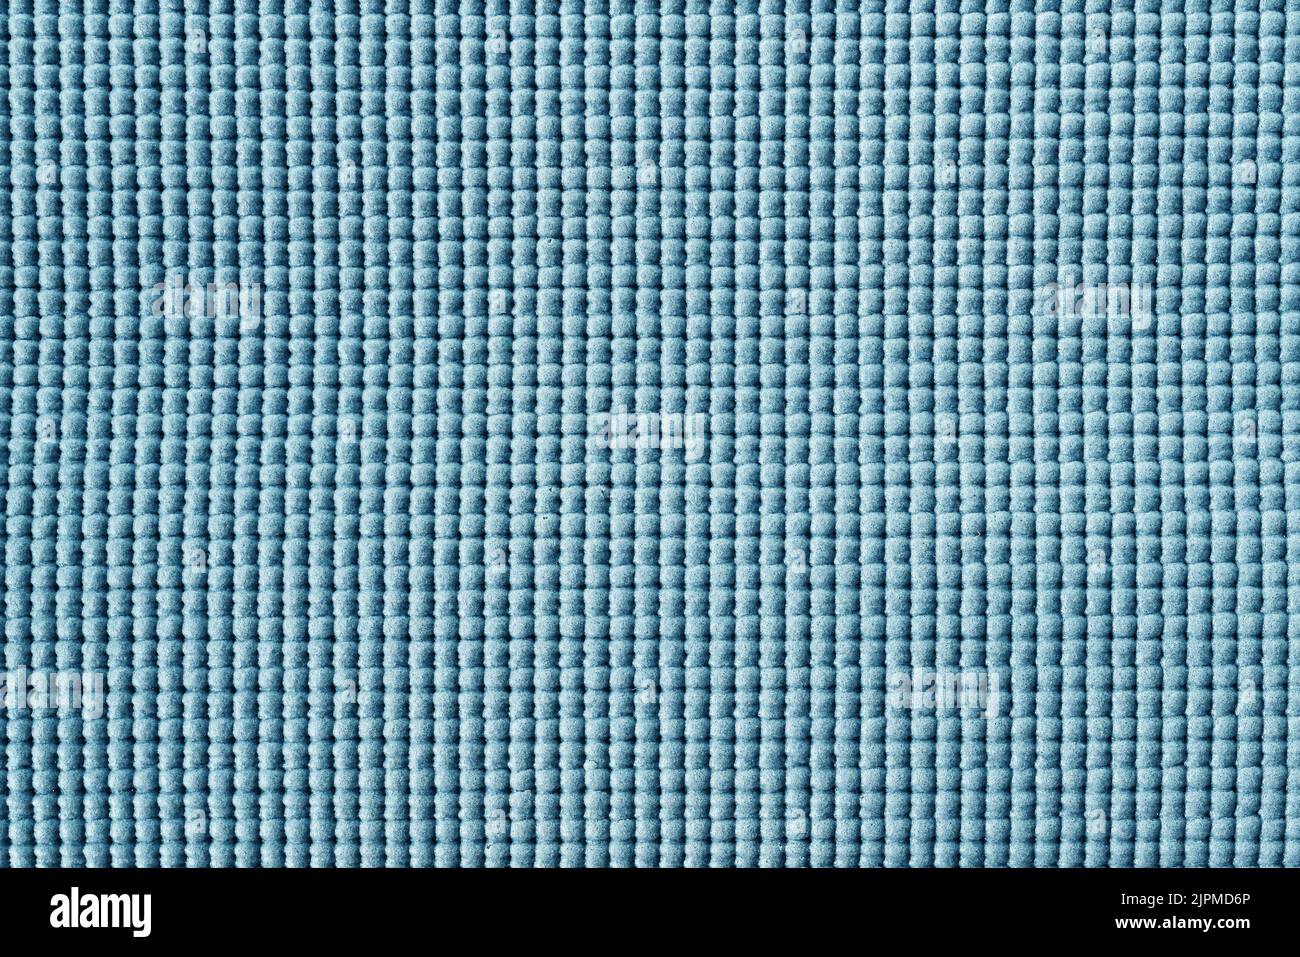 close-up view of synthetic fabric, foamed material texture Stock Photo